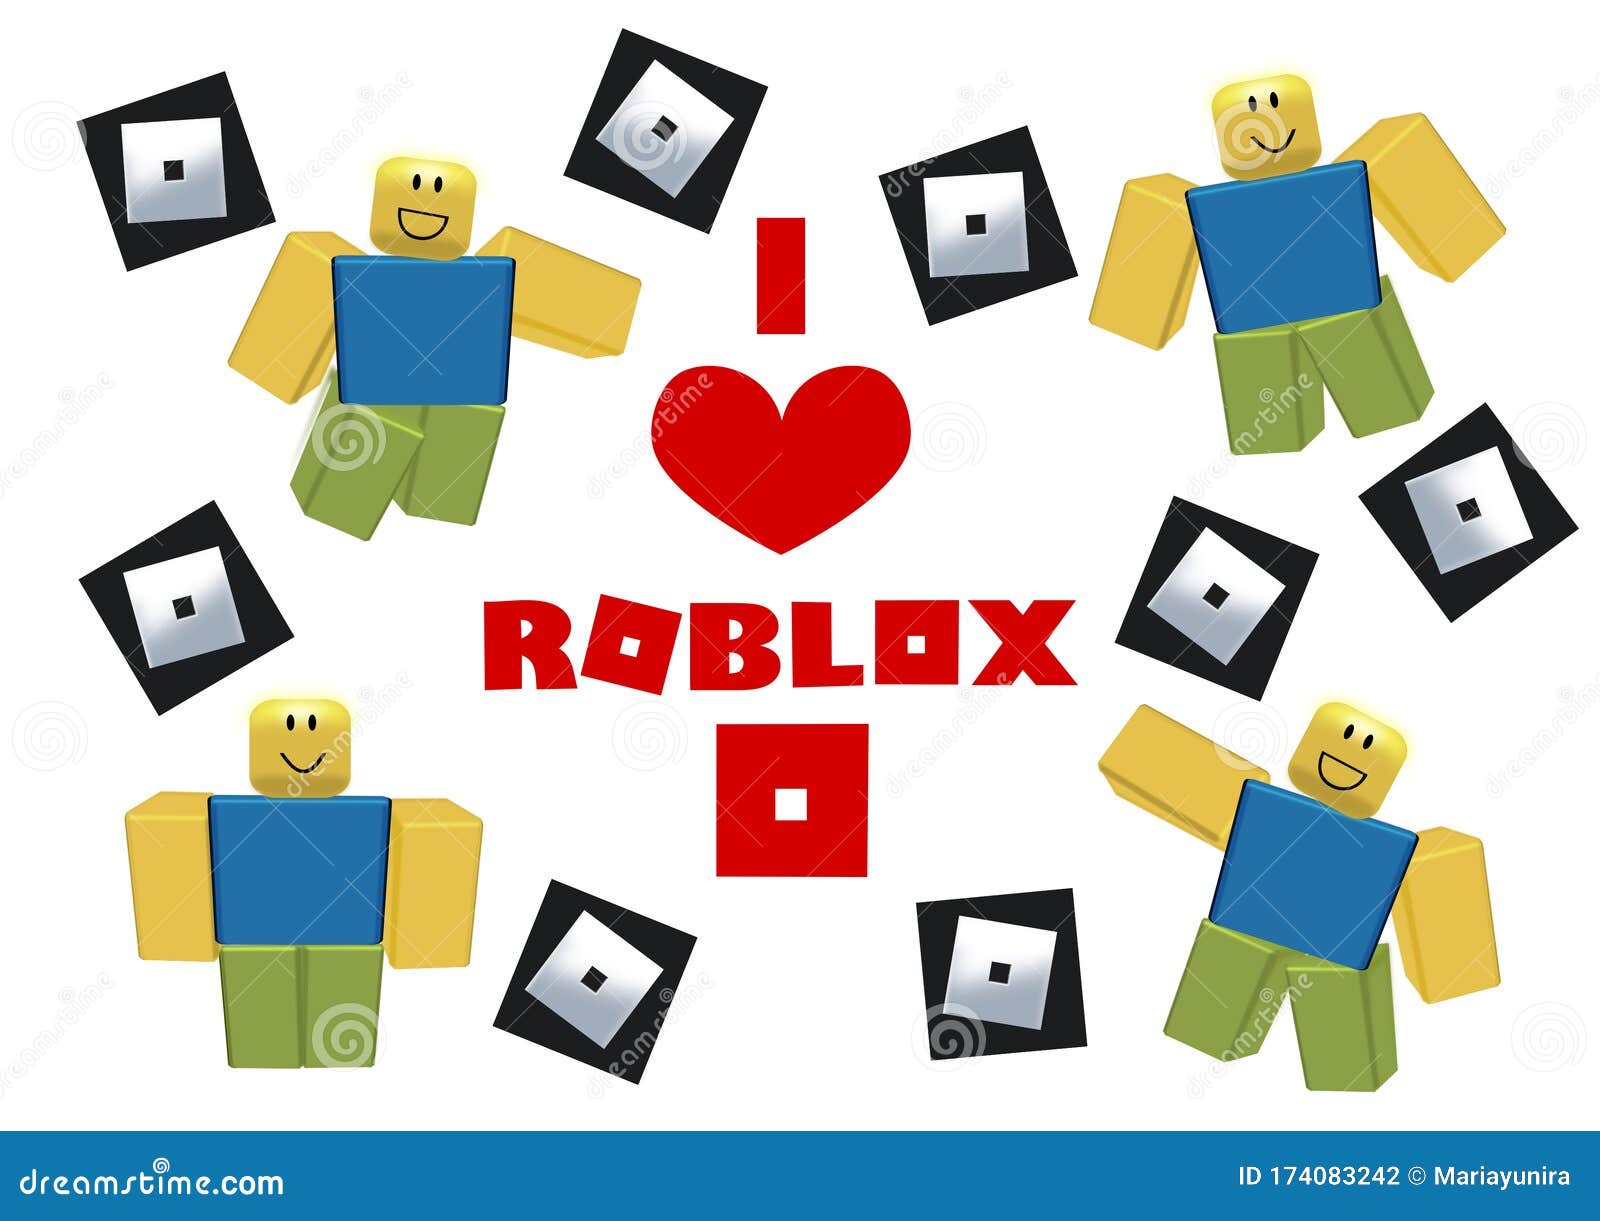 Roblox Logo And Character Editorial Photography Illustration Of Game 174083242 - roblox logo id